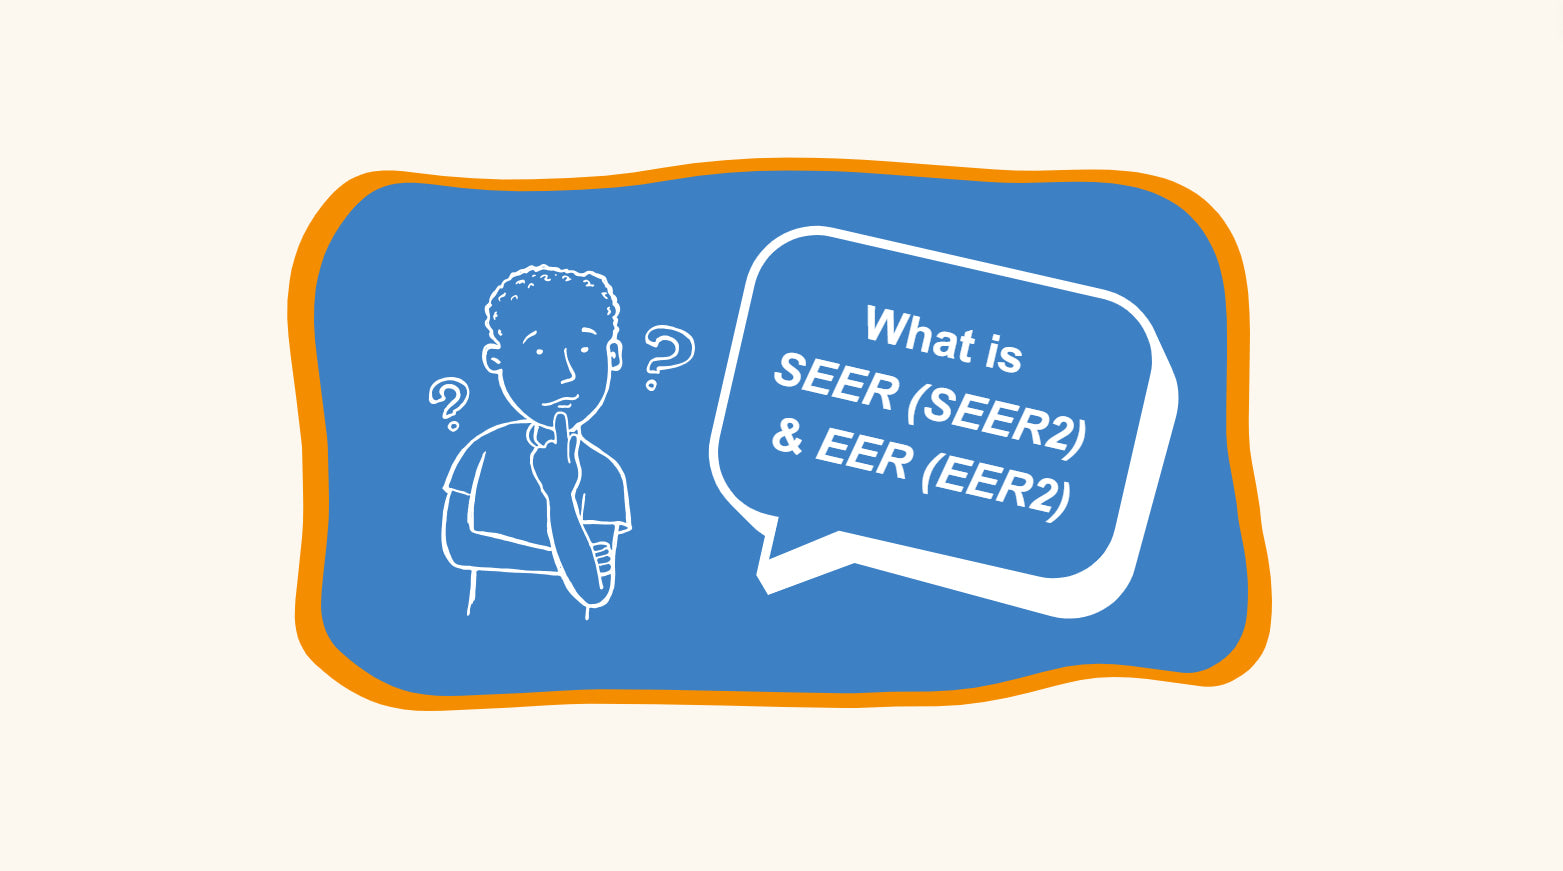 An illustration of a person with a questioning expression thinks "What is SEER (SEER2) & EER (EER2)?".